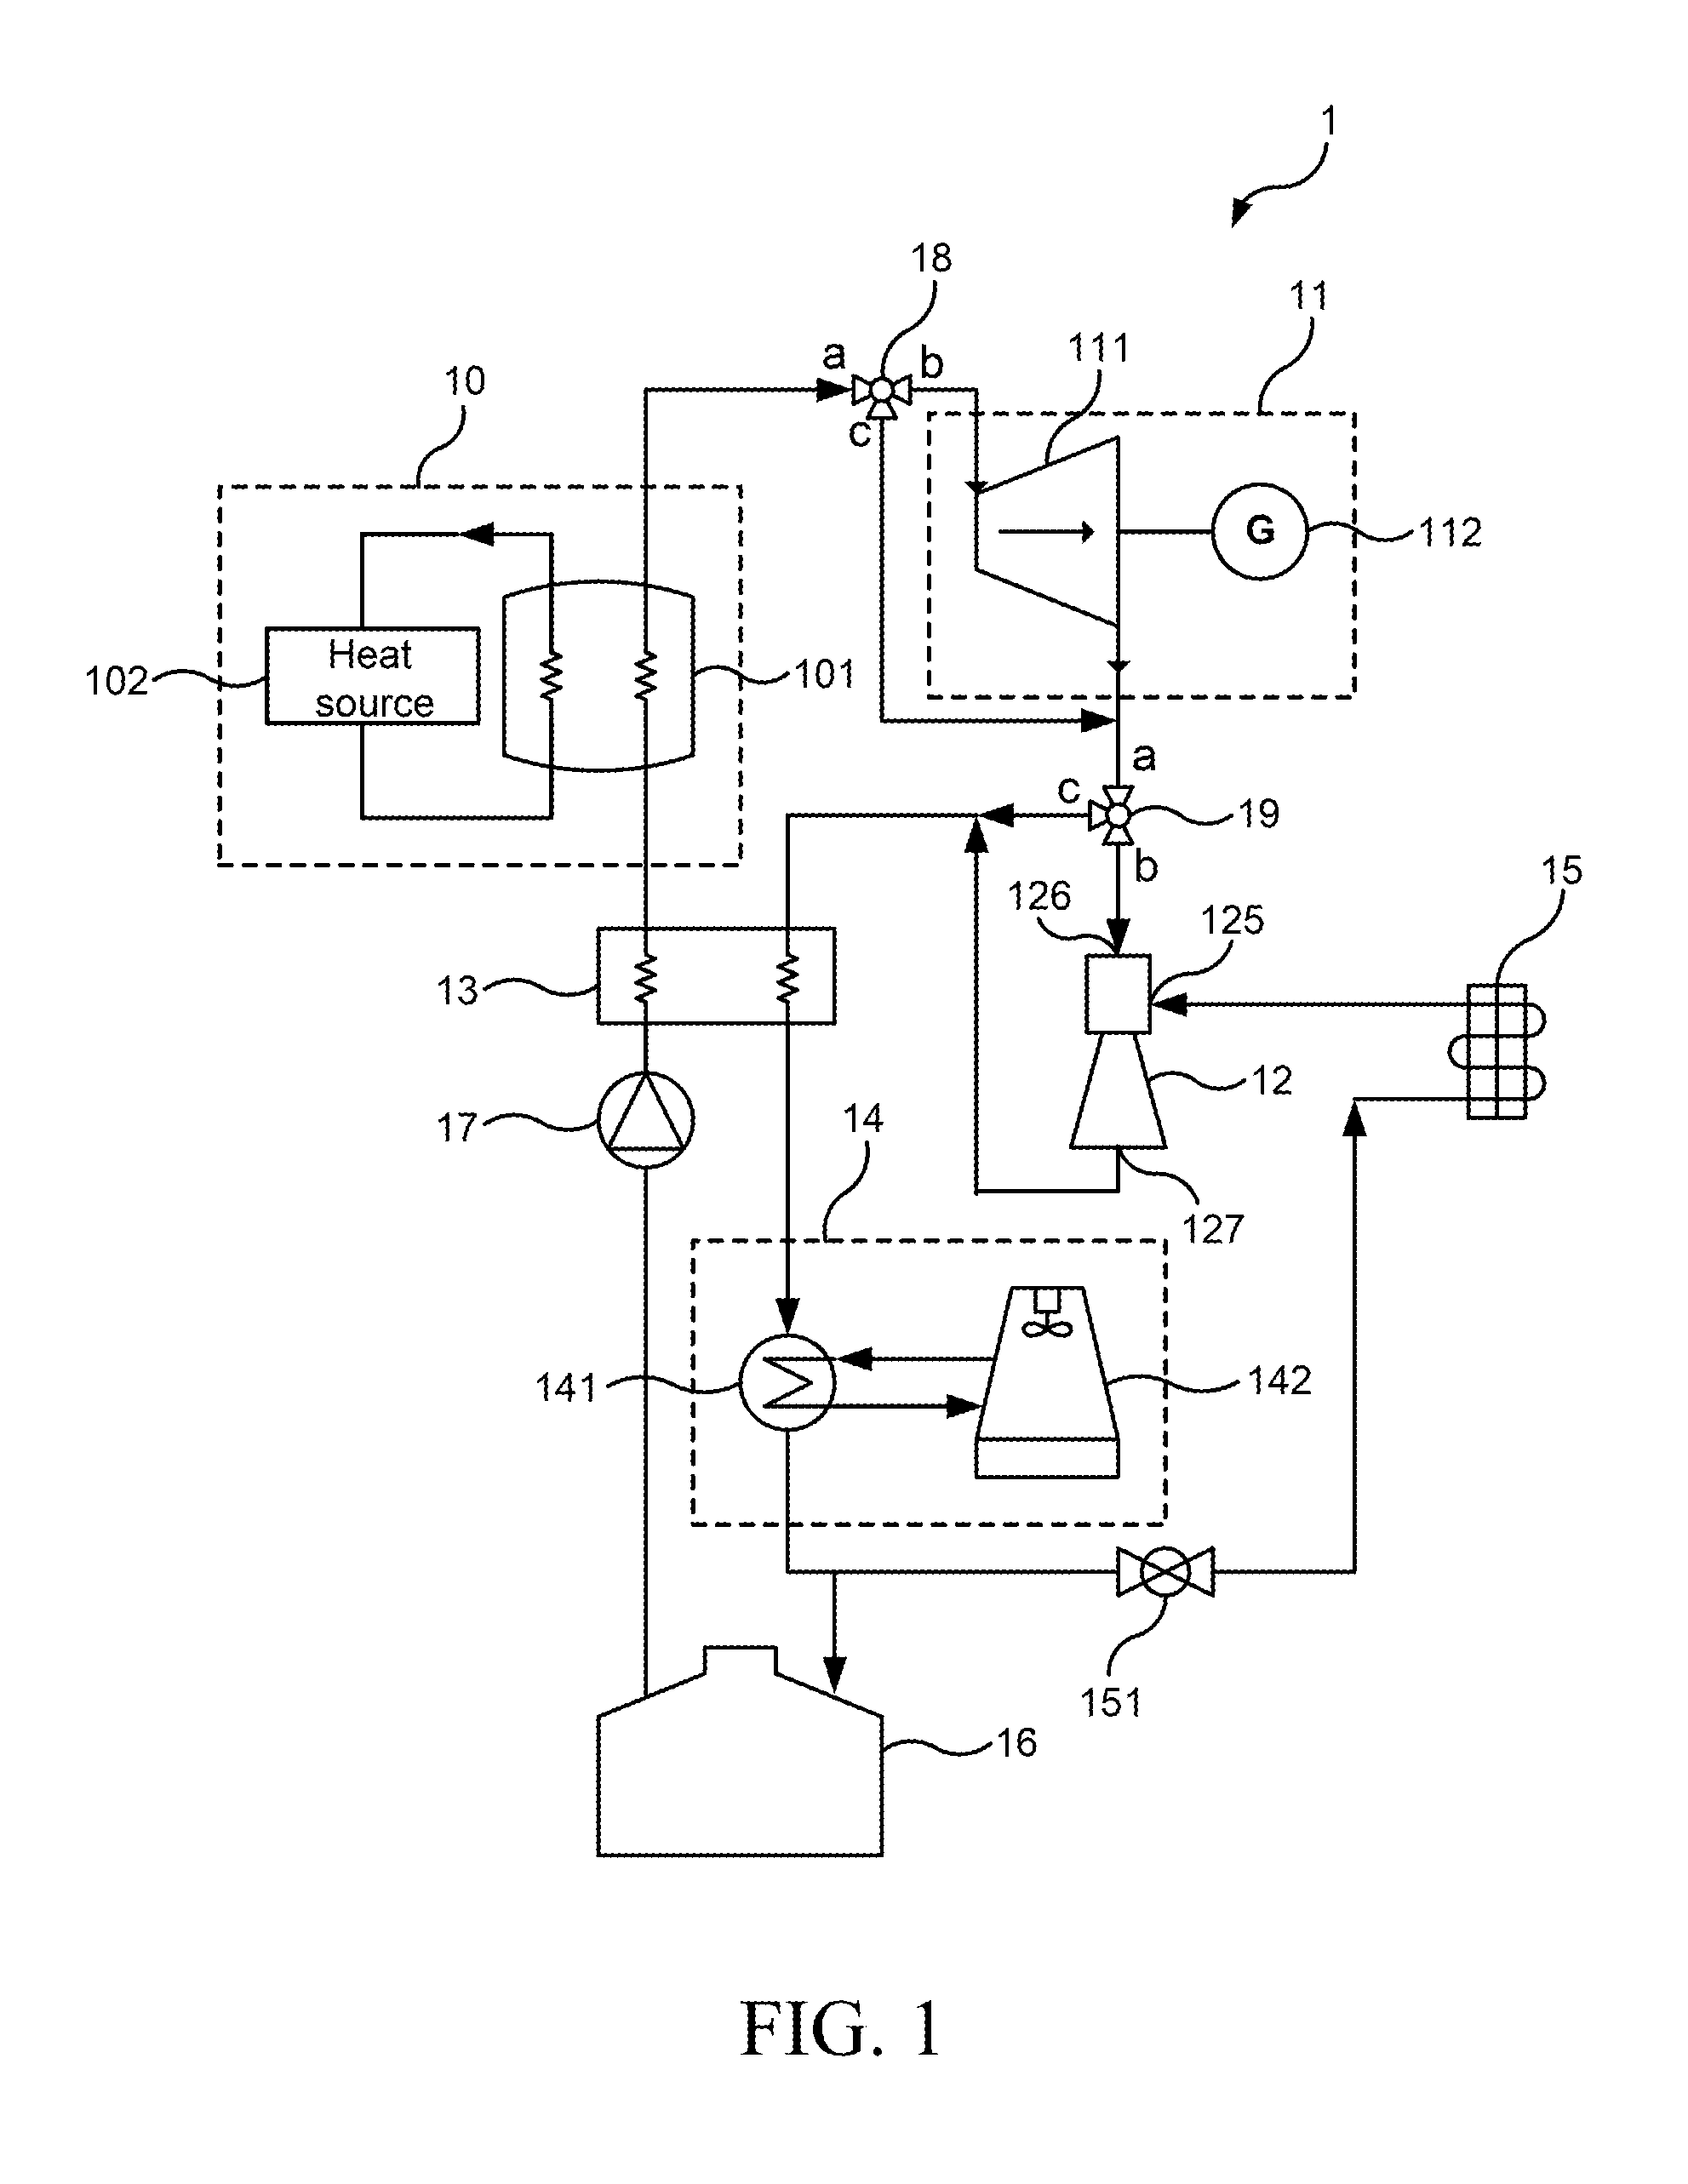 Apparatus and Method for Generating Power and Refrigeration from Low-Grade Heat